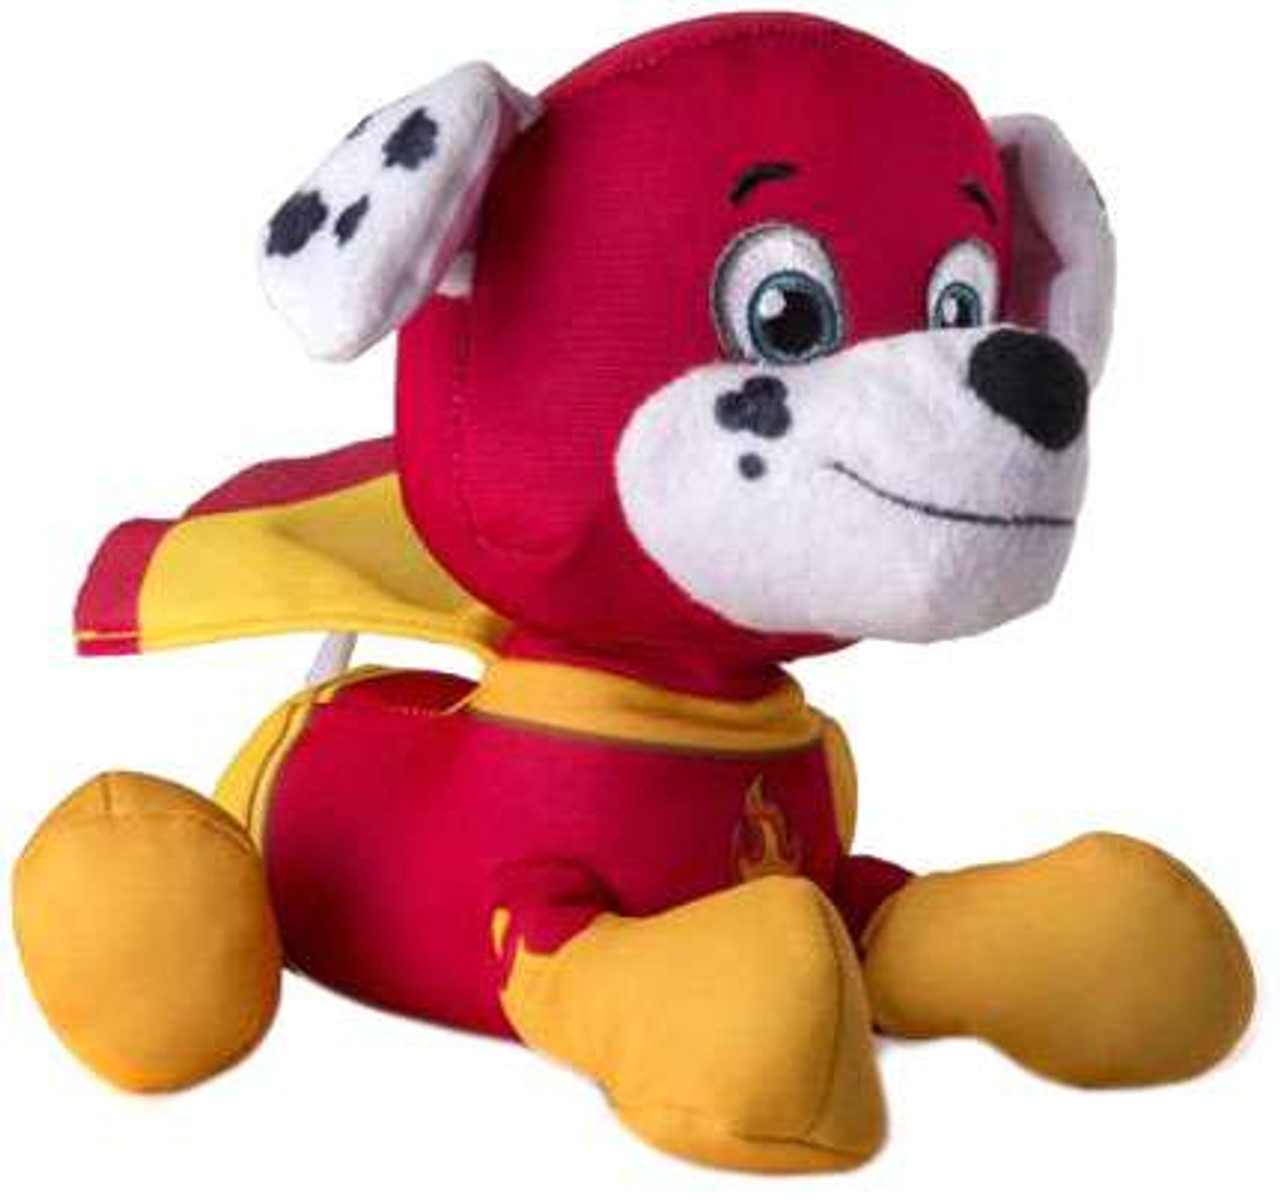 Paw Patrol Super Pups Pup Pals Marshall Exclusive 8 Plush Spin Master